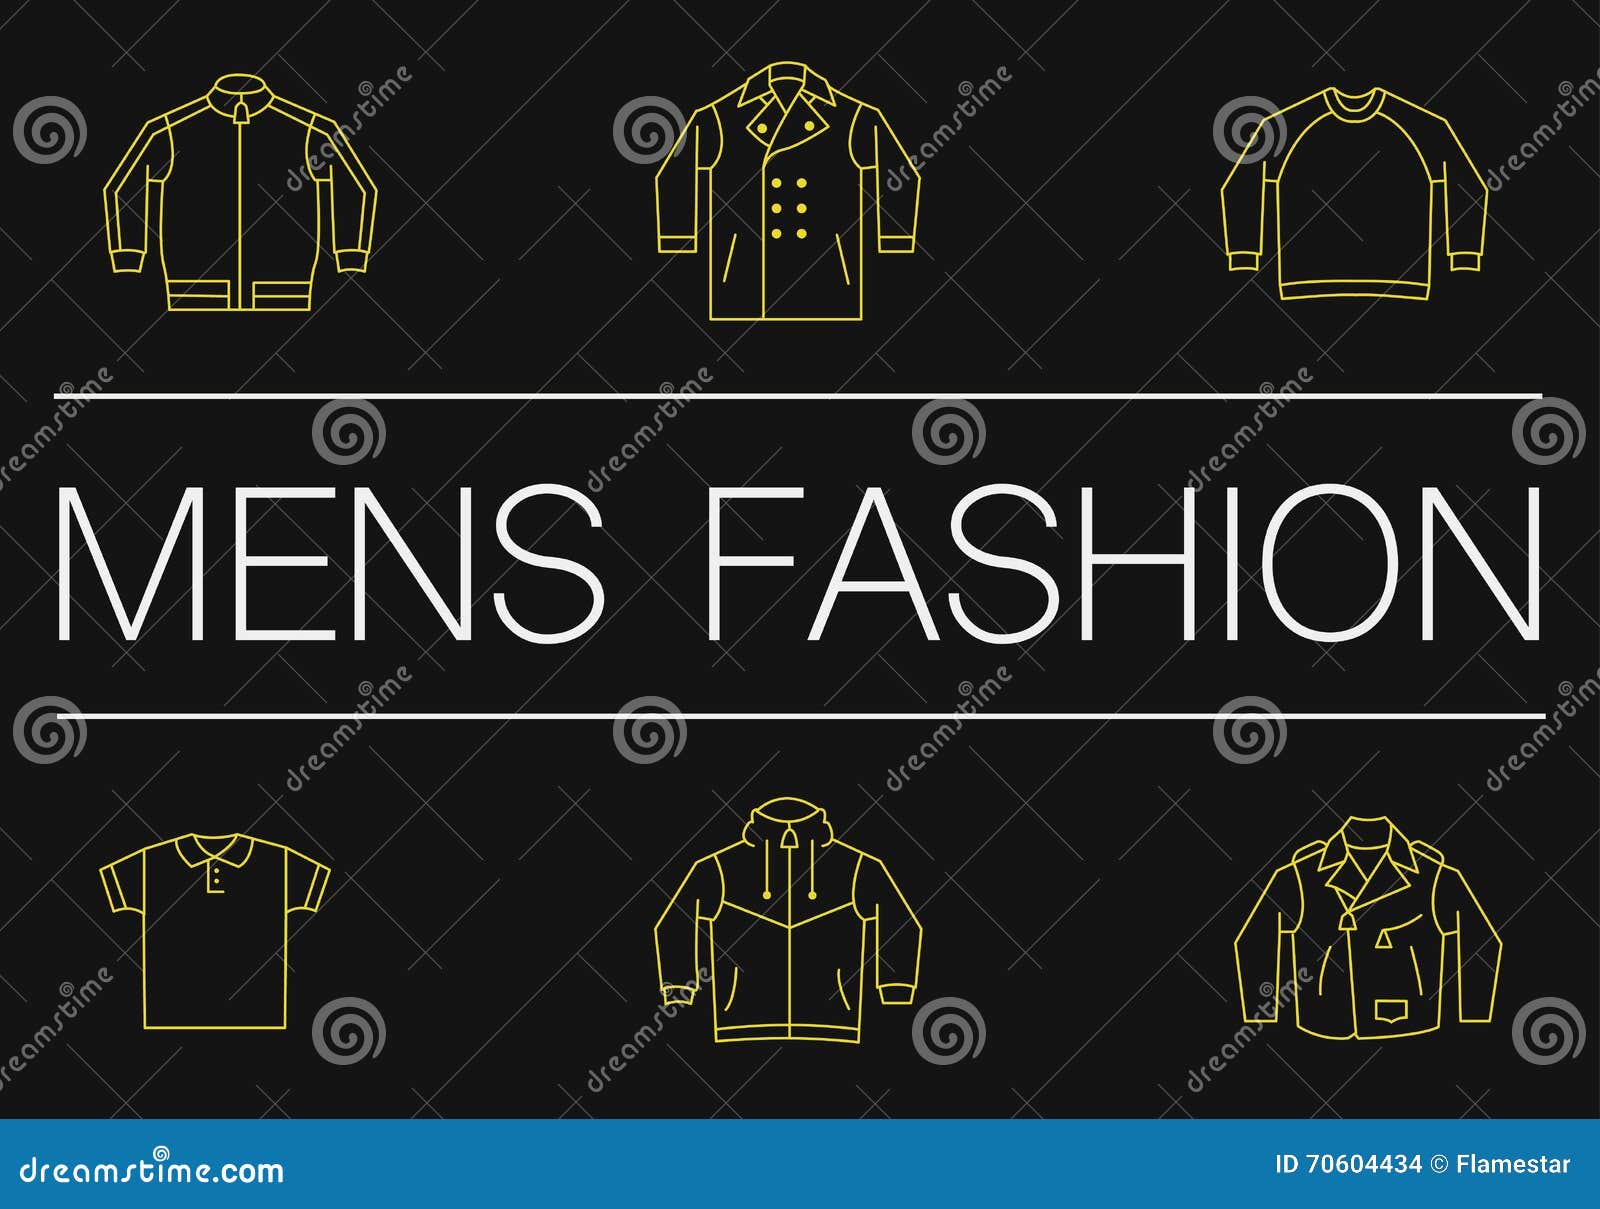 Mens Fashion Thin Line Banner on the Black Stock Vector - Illustration of  monochrome, isolated: 70604434